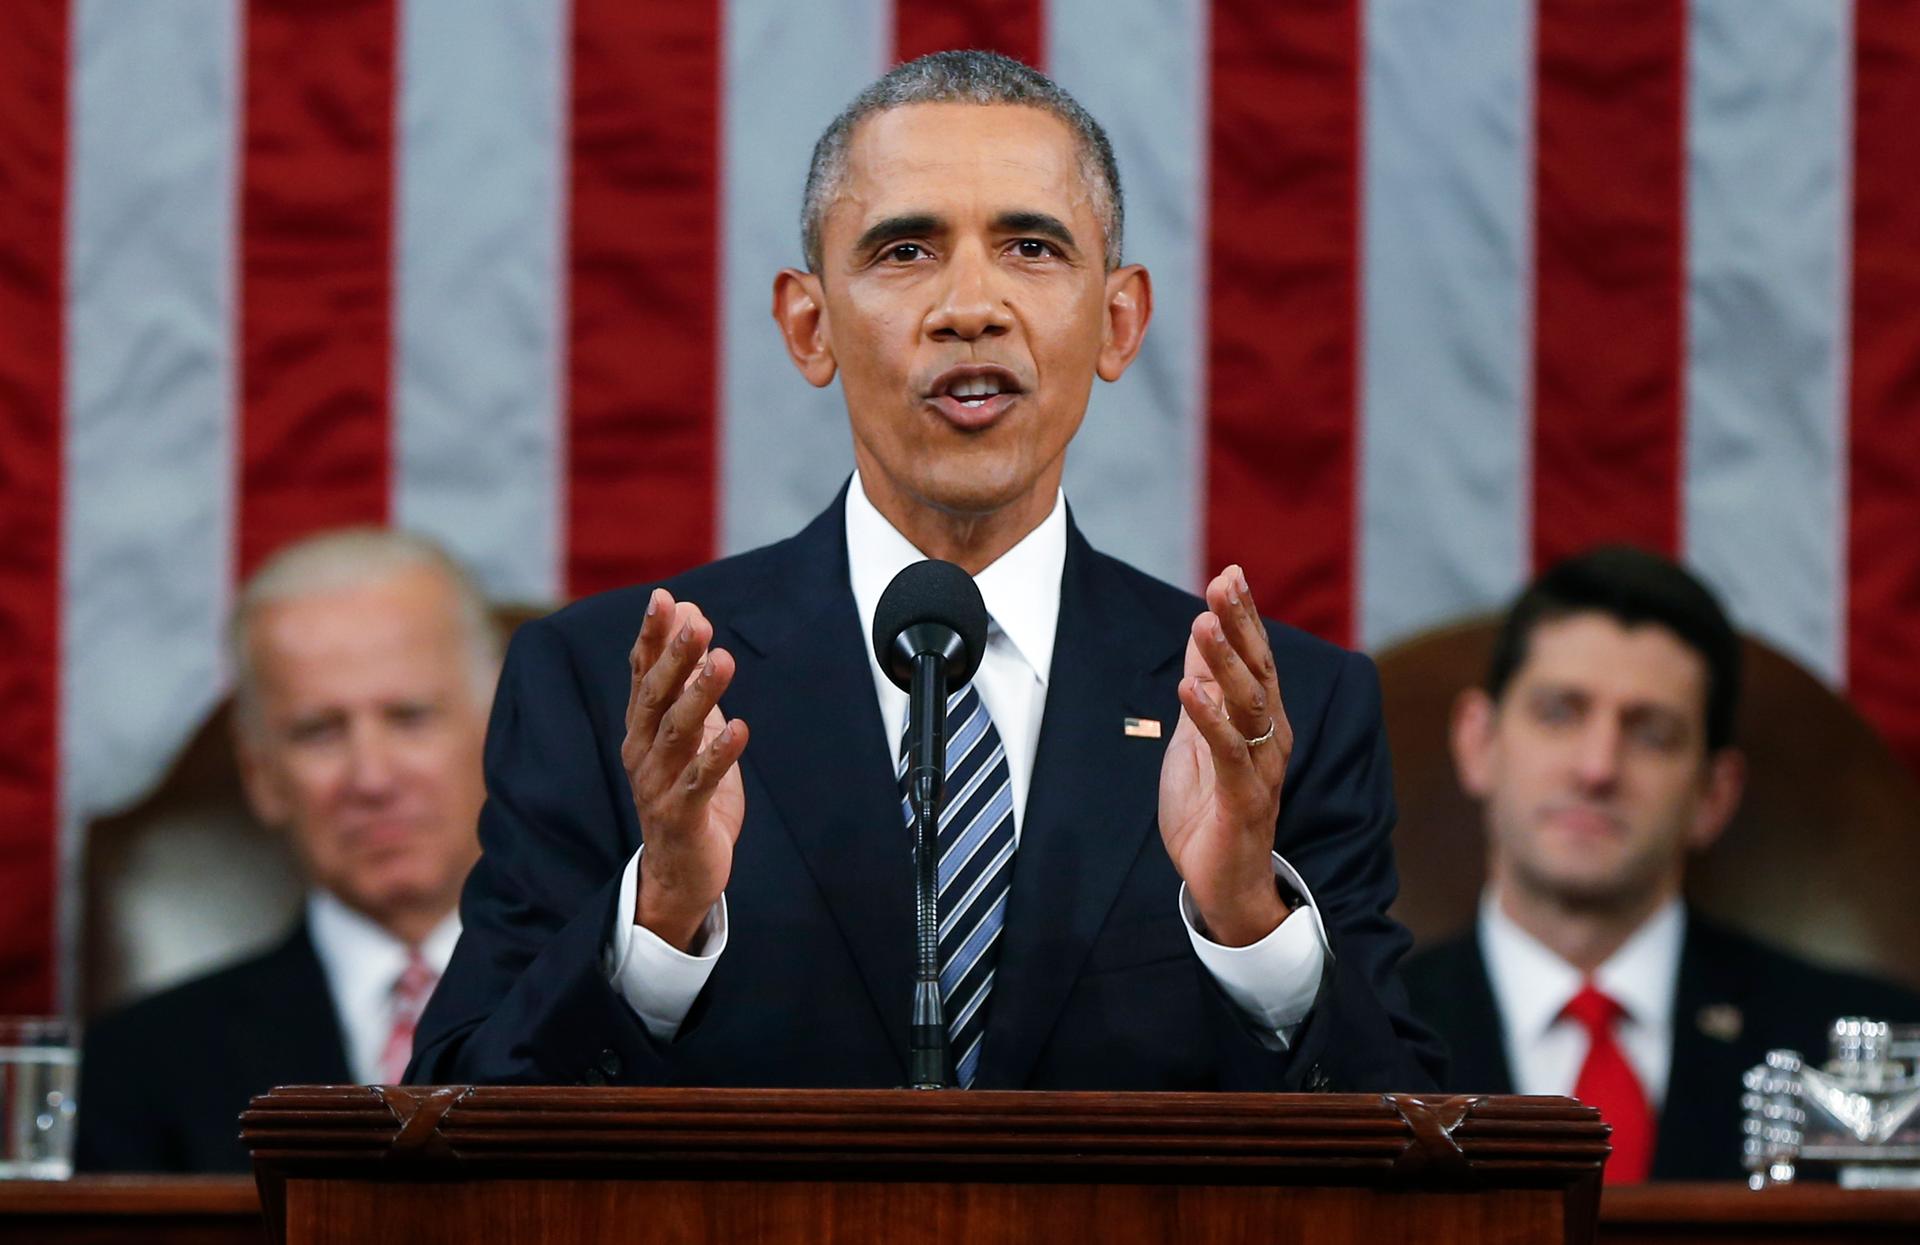 President Barack Obama delivers his final State of the Union address to a joint session of Congress